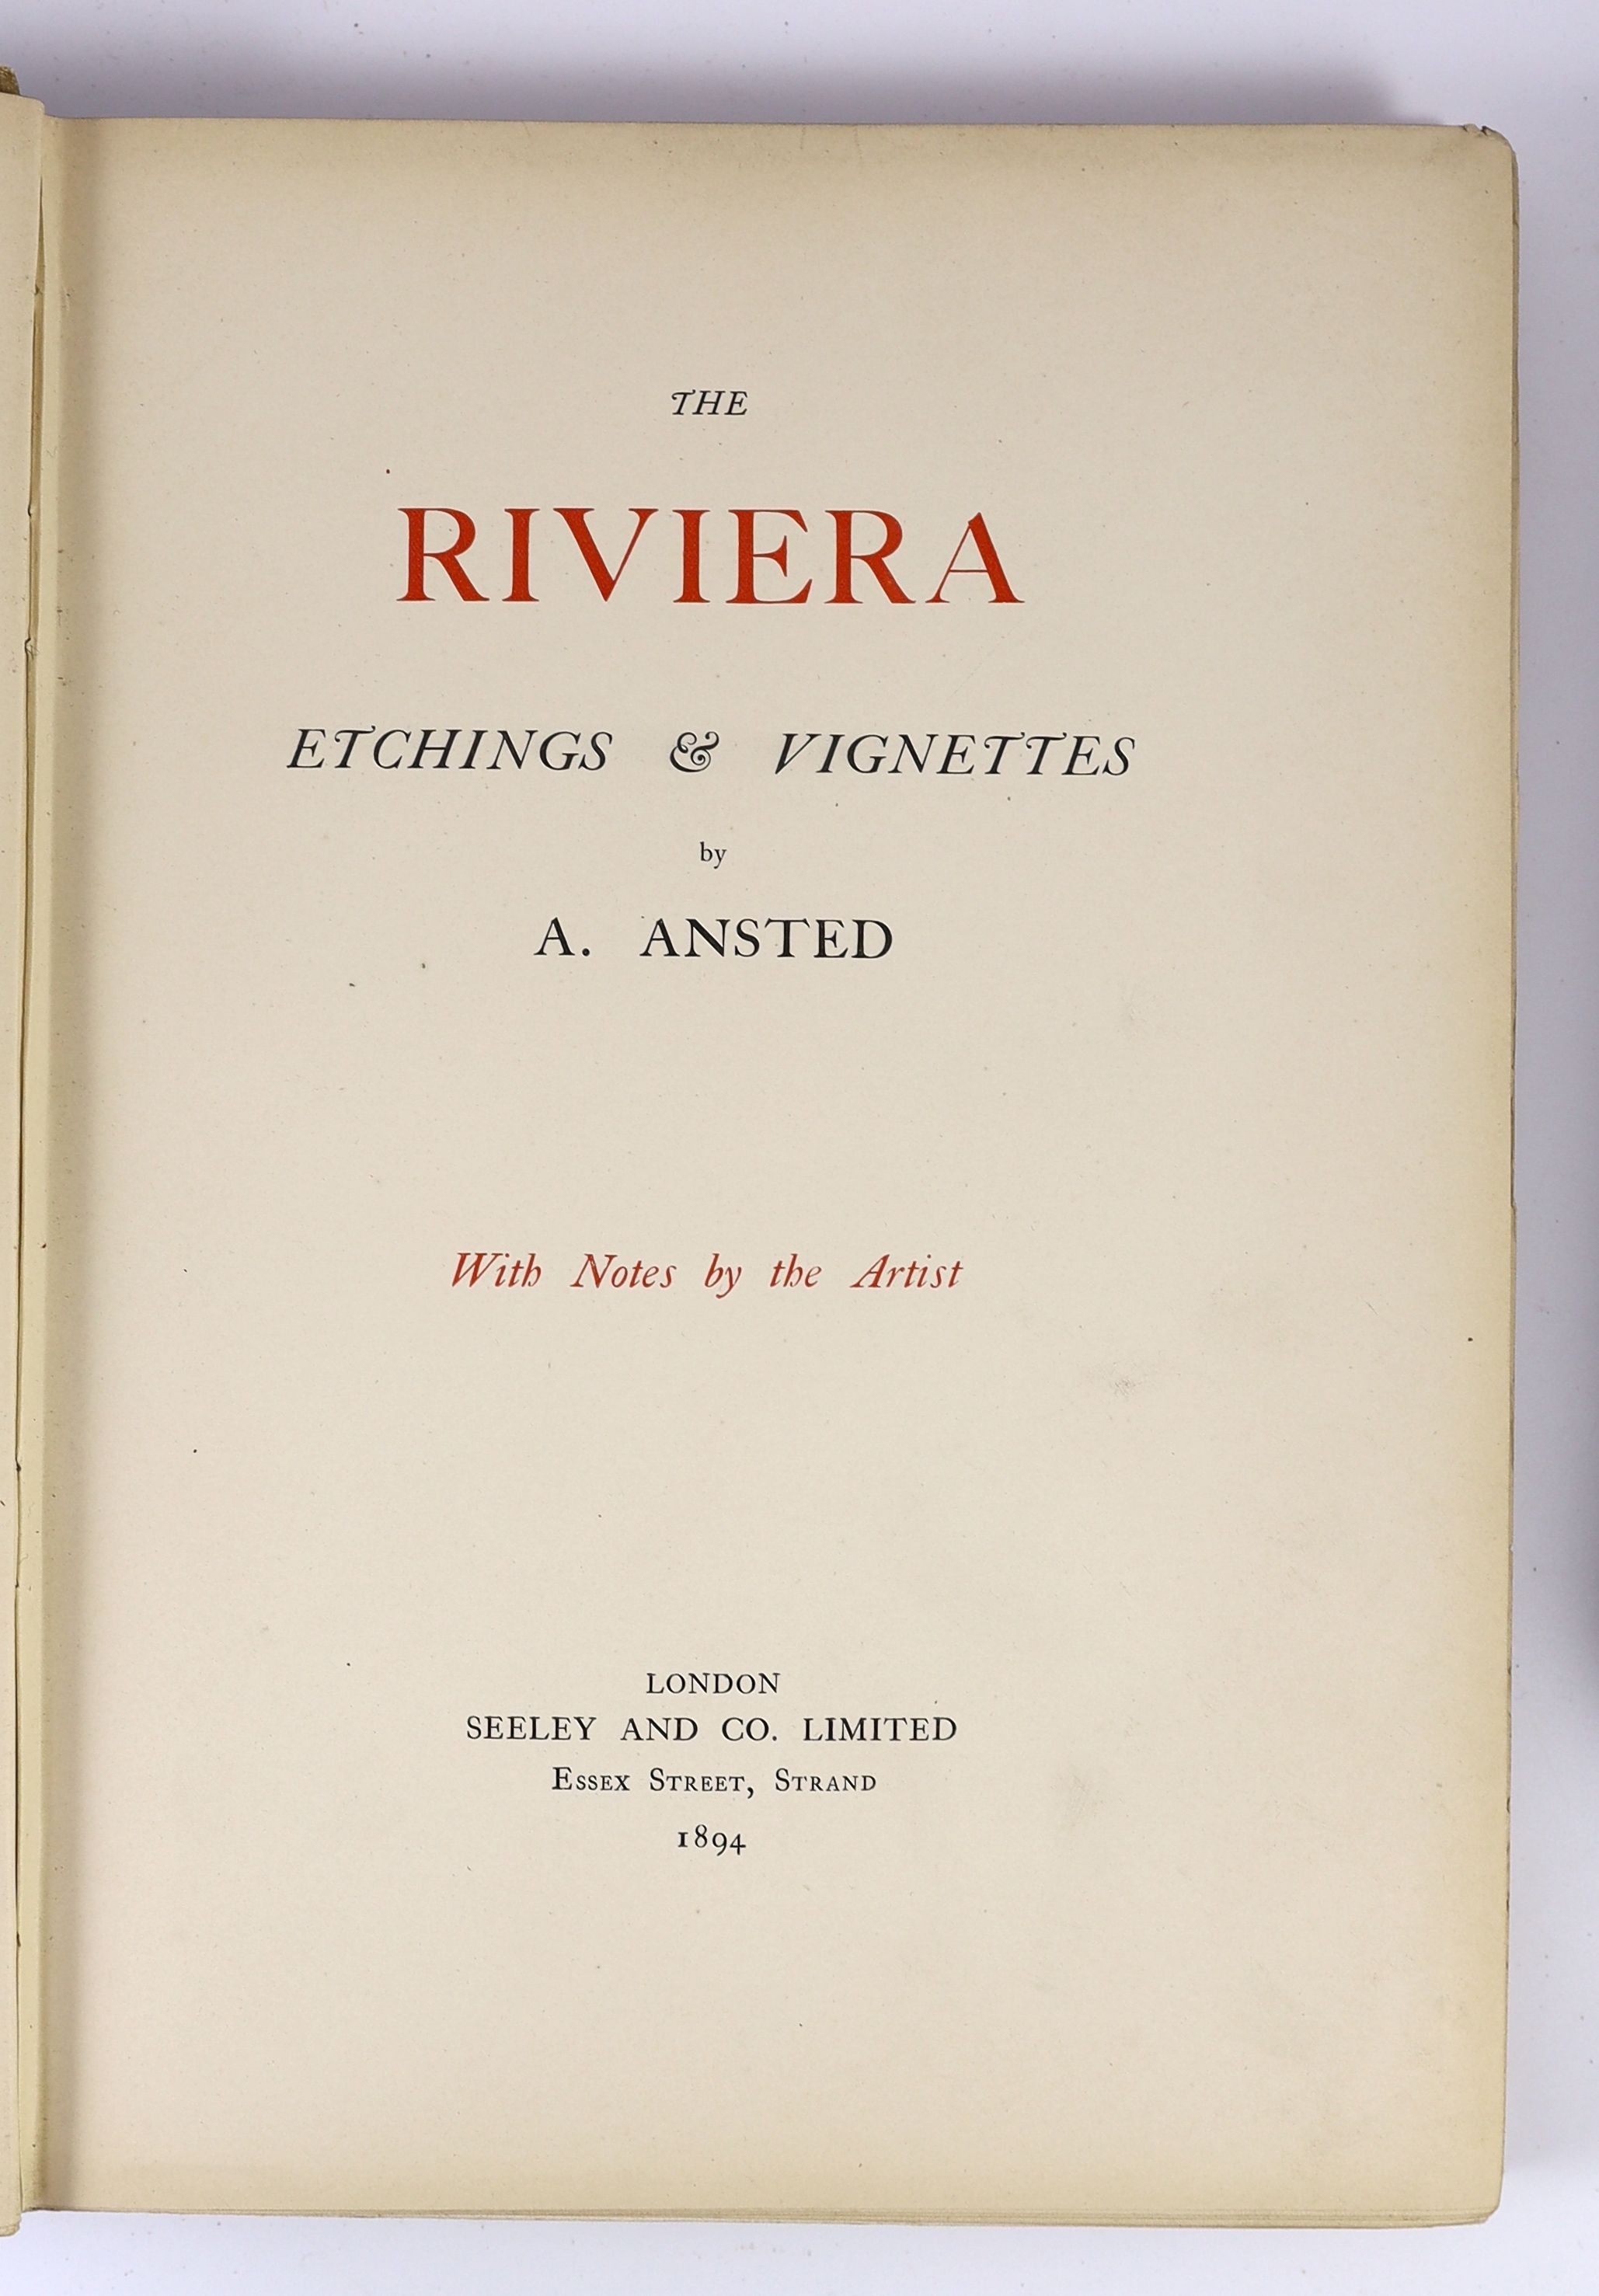 Ansted, Alexander - The Riviera, one of 50, 4to, original buckram, with 20 signed etchings, Seeley & Co., London, 1894, and Beattie, William - Switzerland, 2 vols, illustrated by W.H. Bartlett, 4to, embossed red morocco,